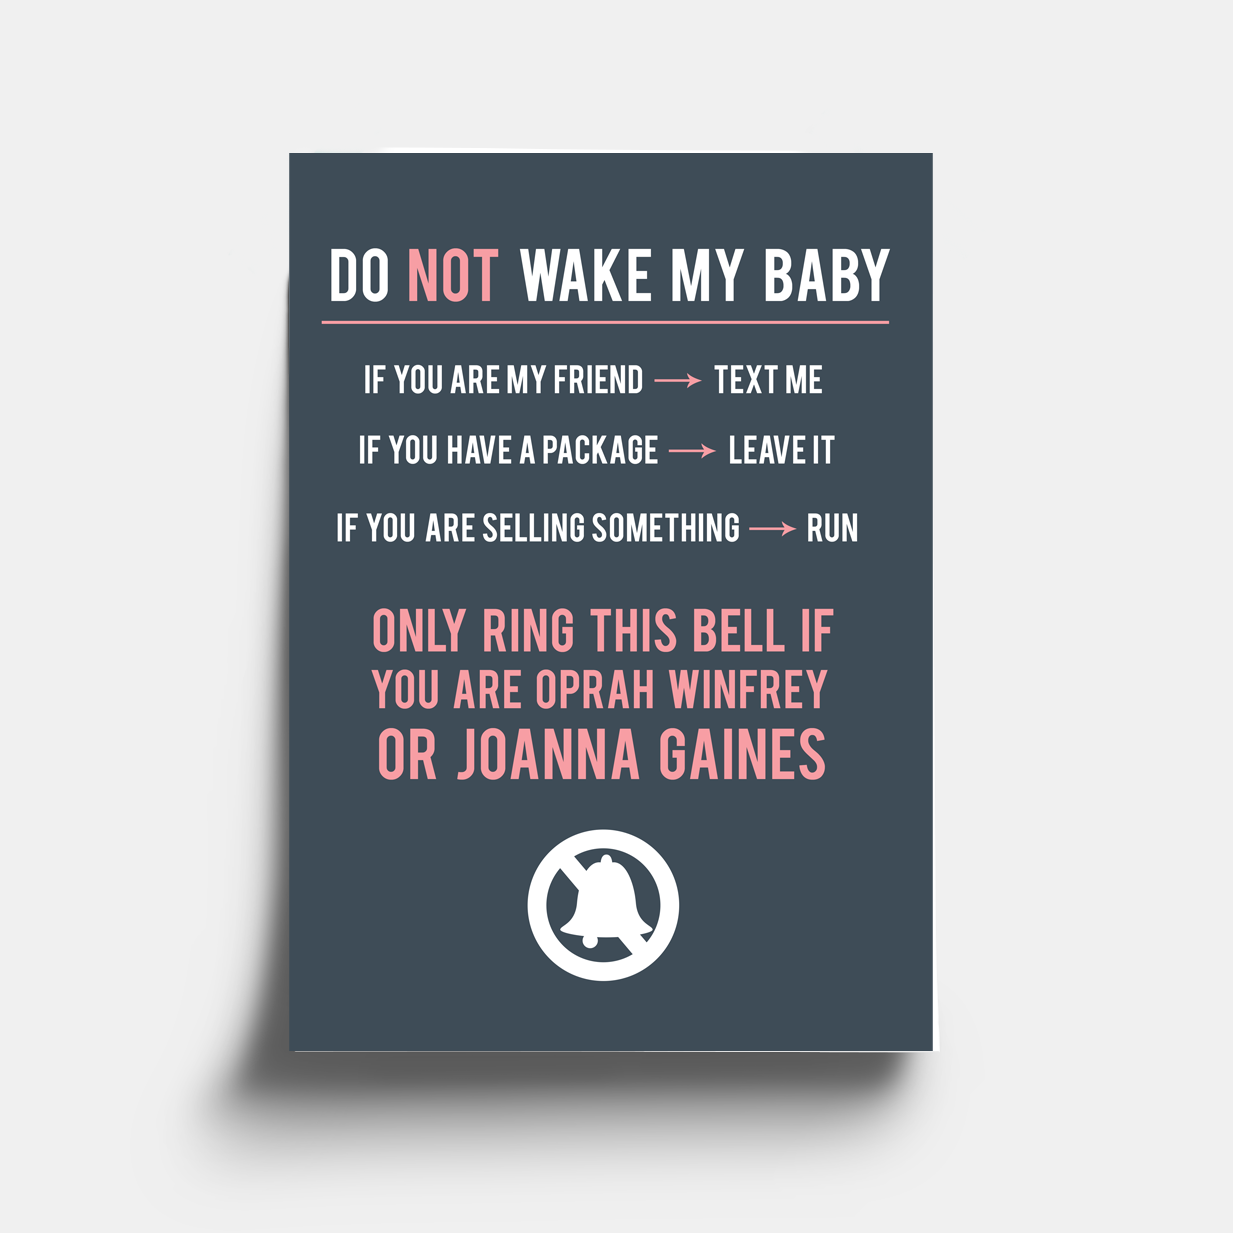 Don't Wake My Baby! Free Printable Sign for New Parents